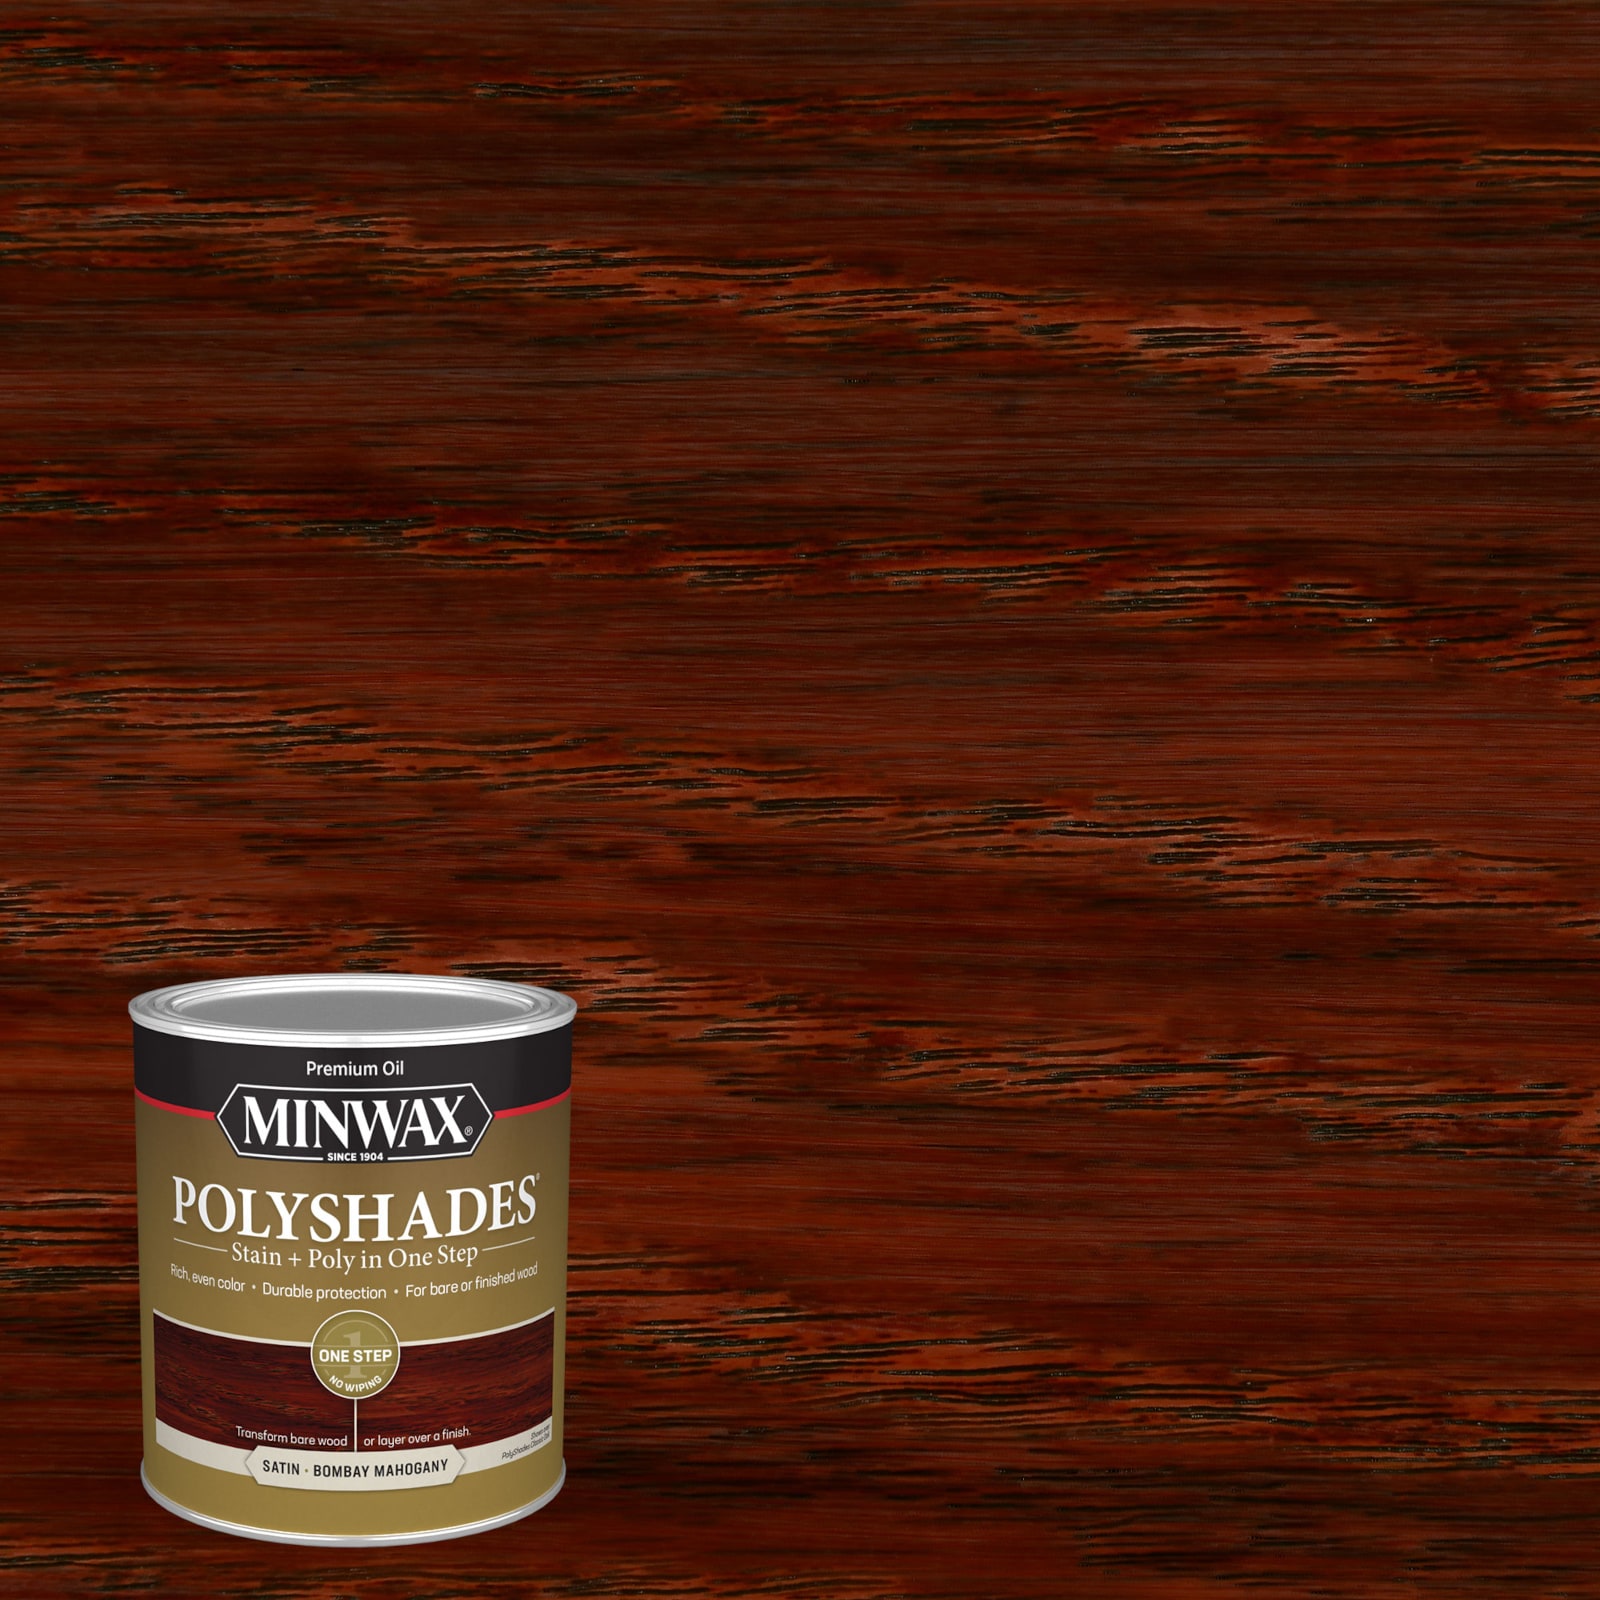 Minwax Polyshades Oil Based Ay, Stain And Polyurethane In One For Hardwood Floors